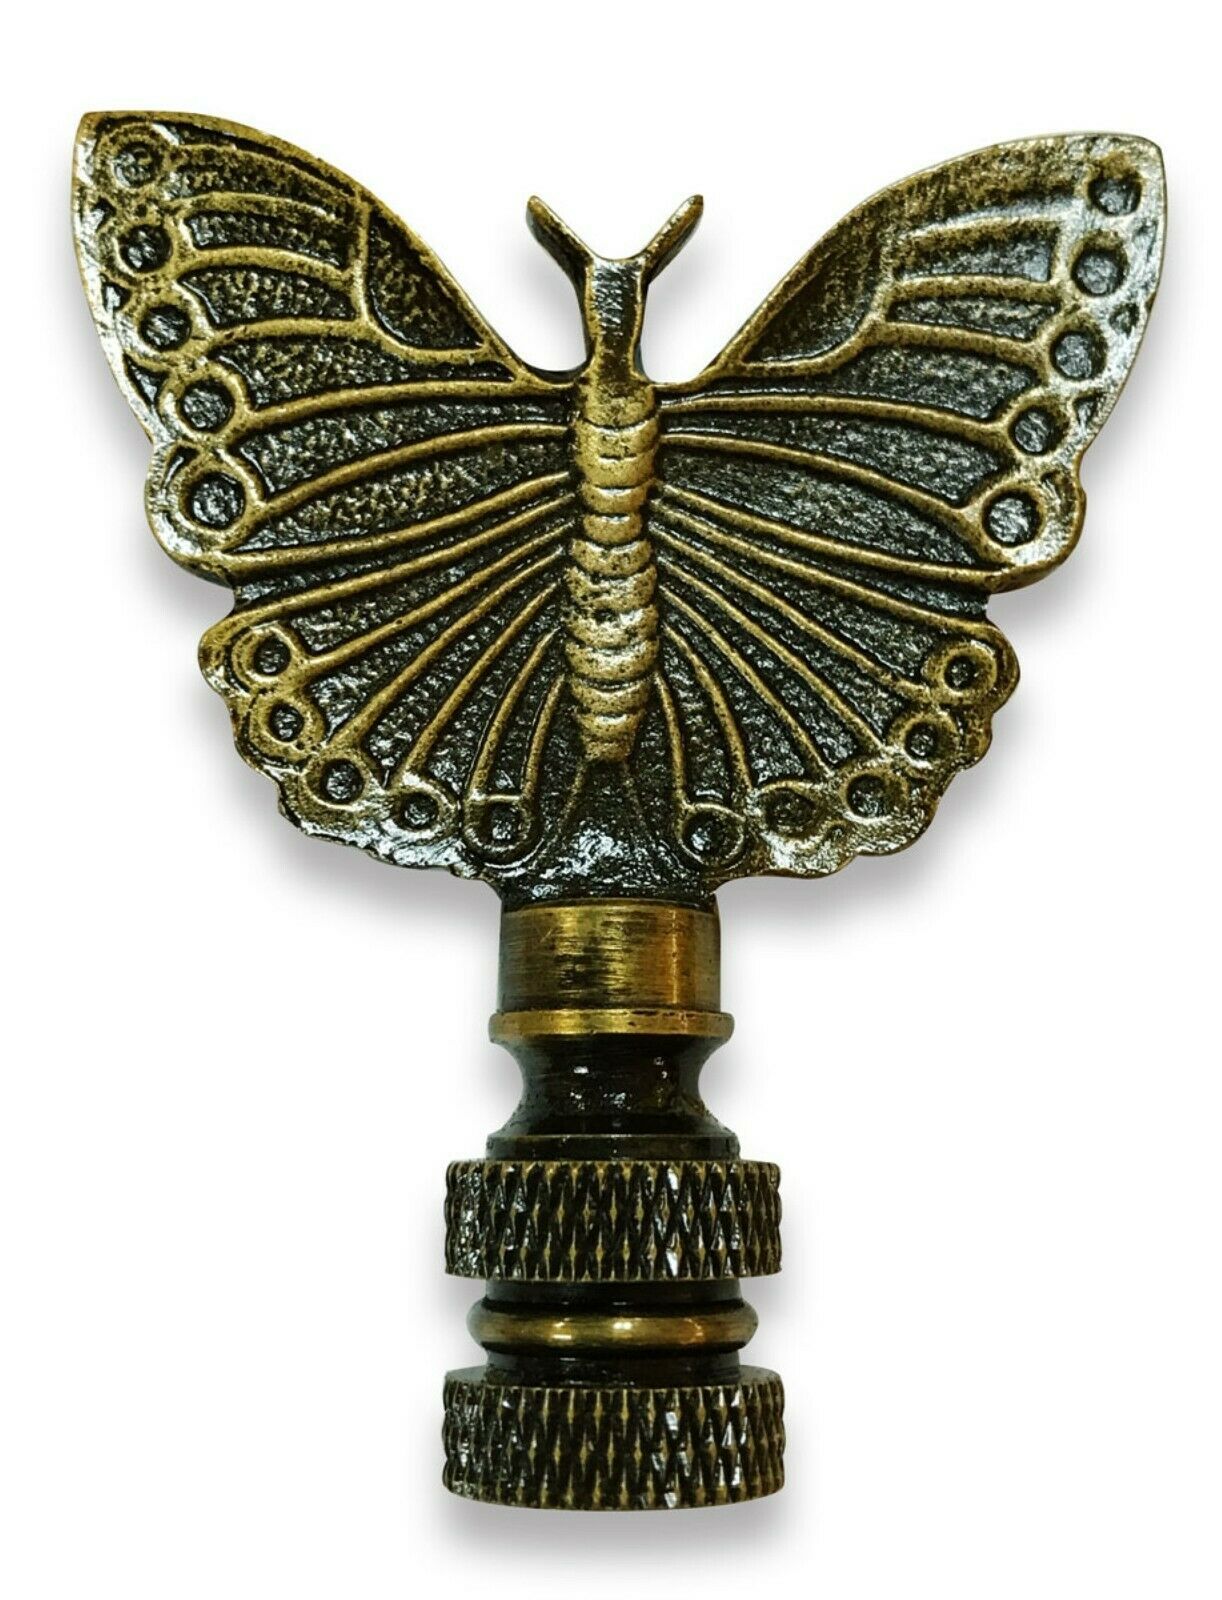 Royal Designs Lamp Finial Monarch Butterfly 2.25 Antique Brass Shade Topper